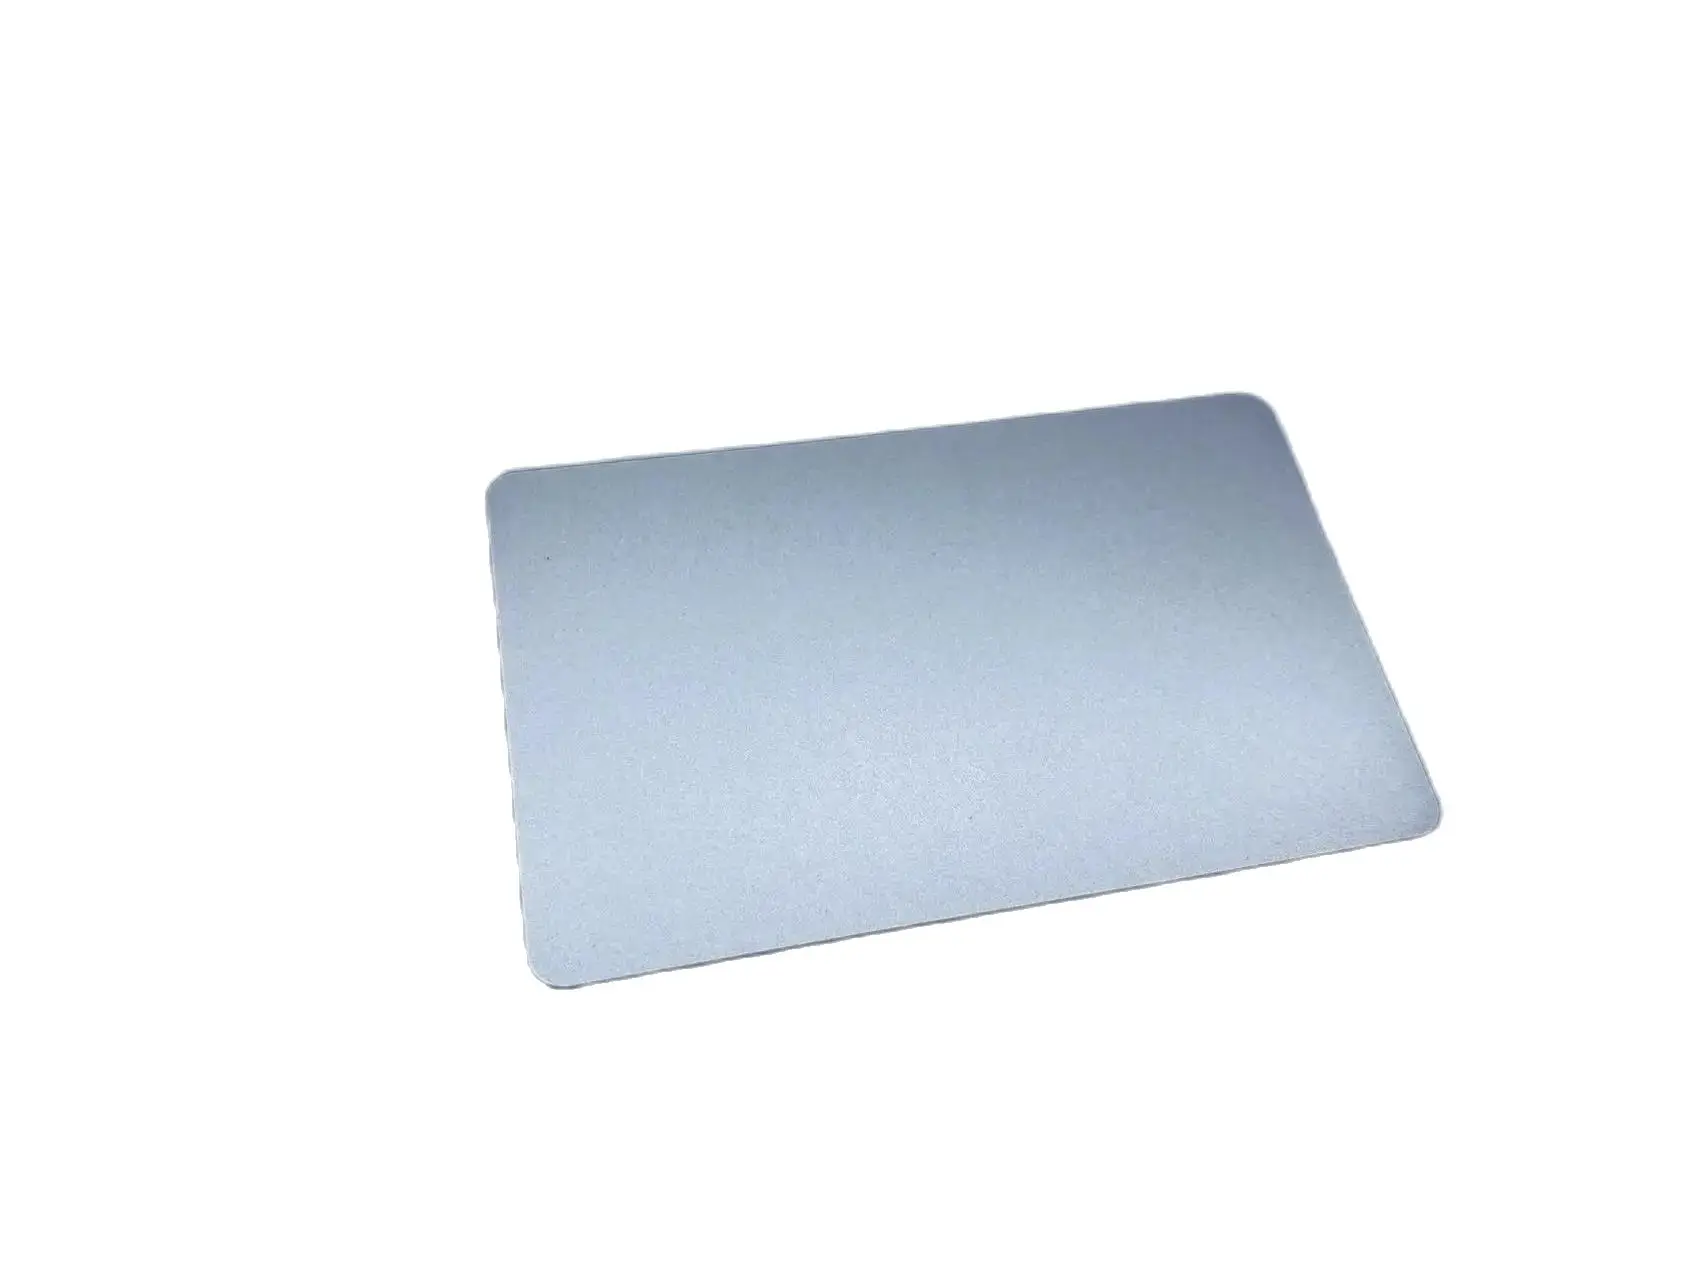 

MLLSE AVAILABLE BRAND NEW TOUCHPAD FOR Acer Aspire S40-53-578N S40-53 Trackpad MOUSE BUTTON Board SILVER FAST SHIPPING